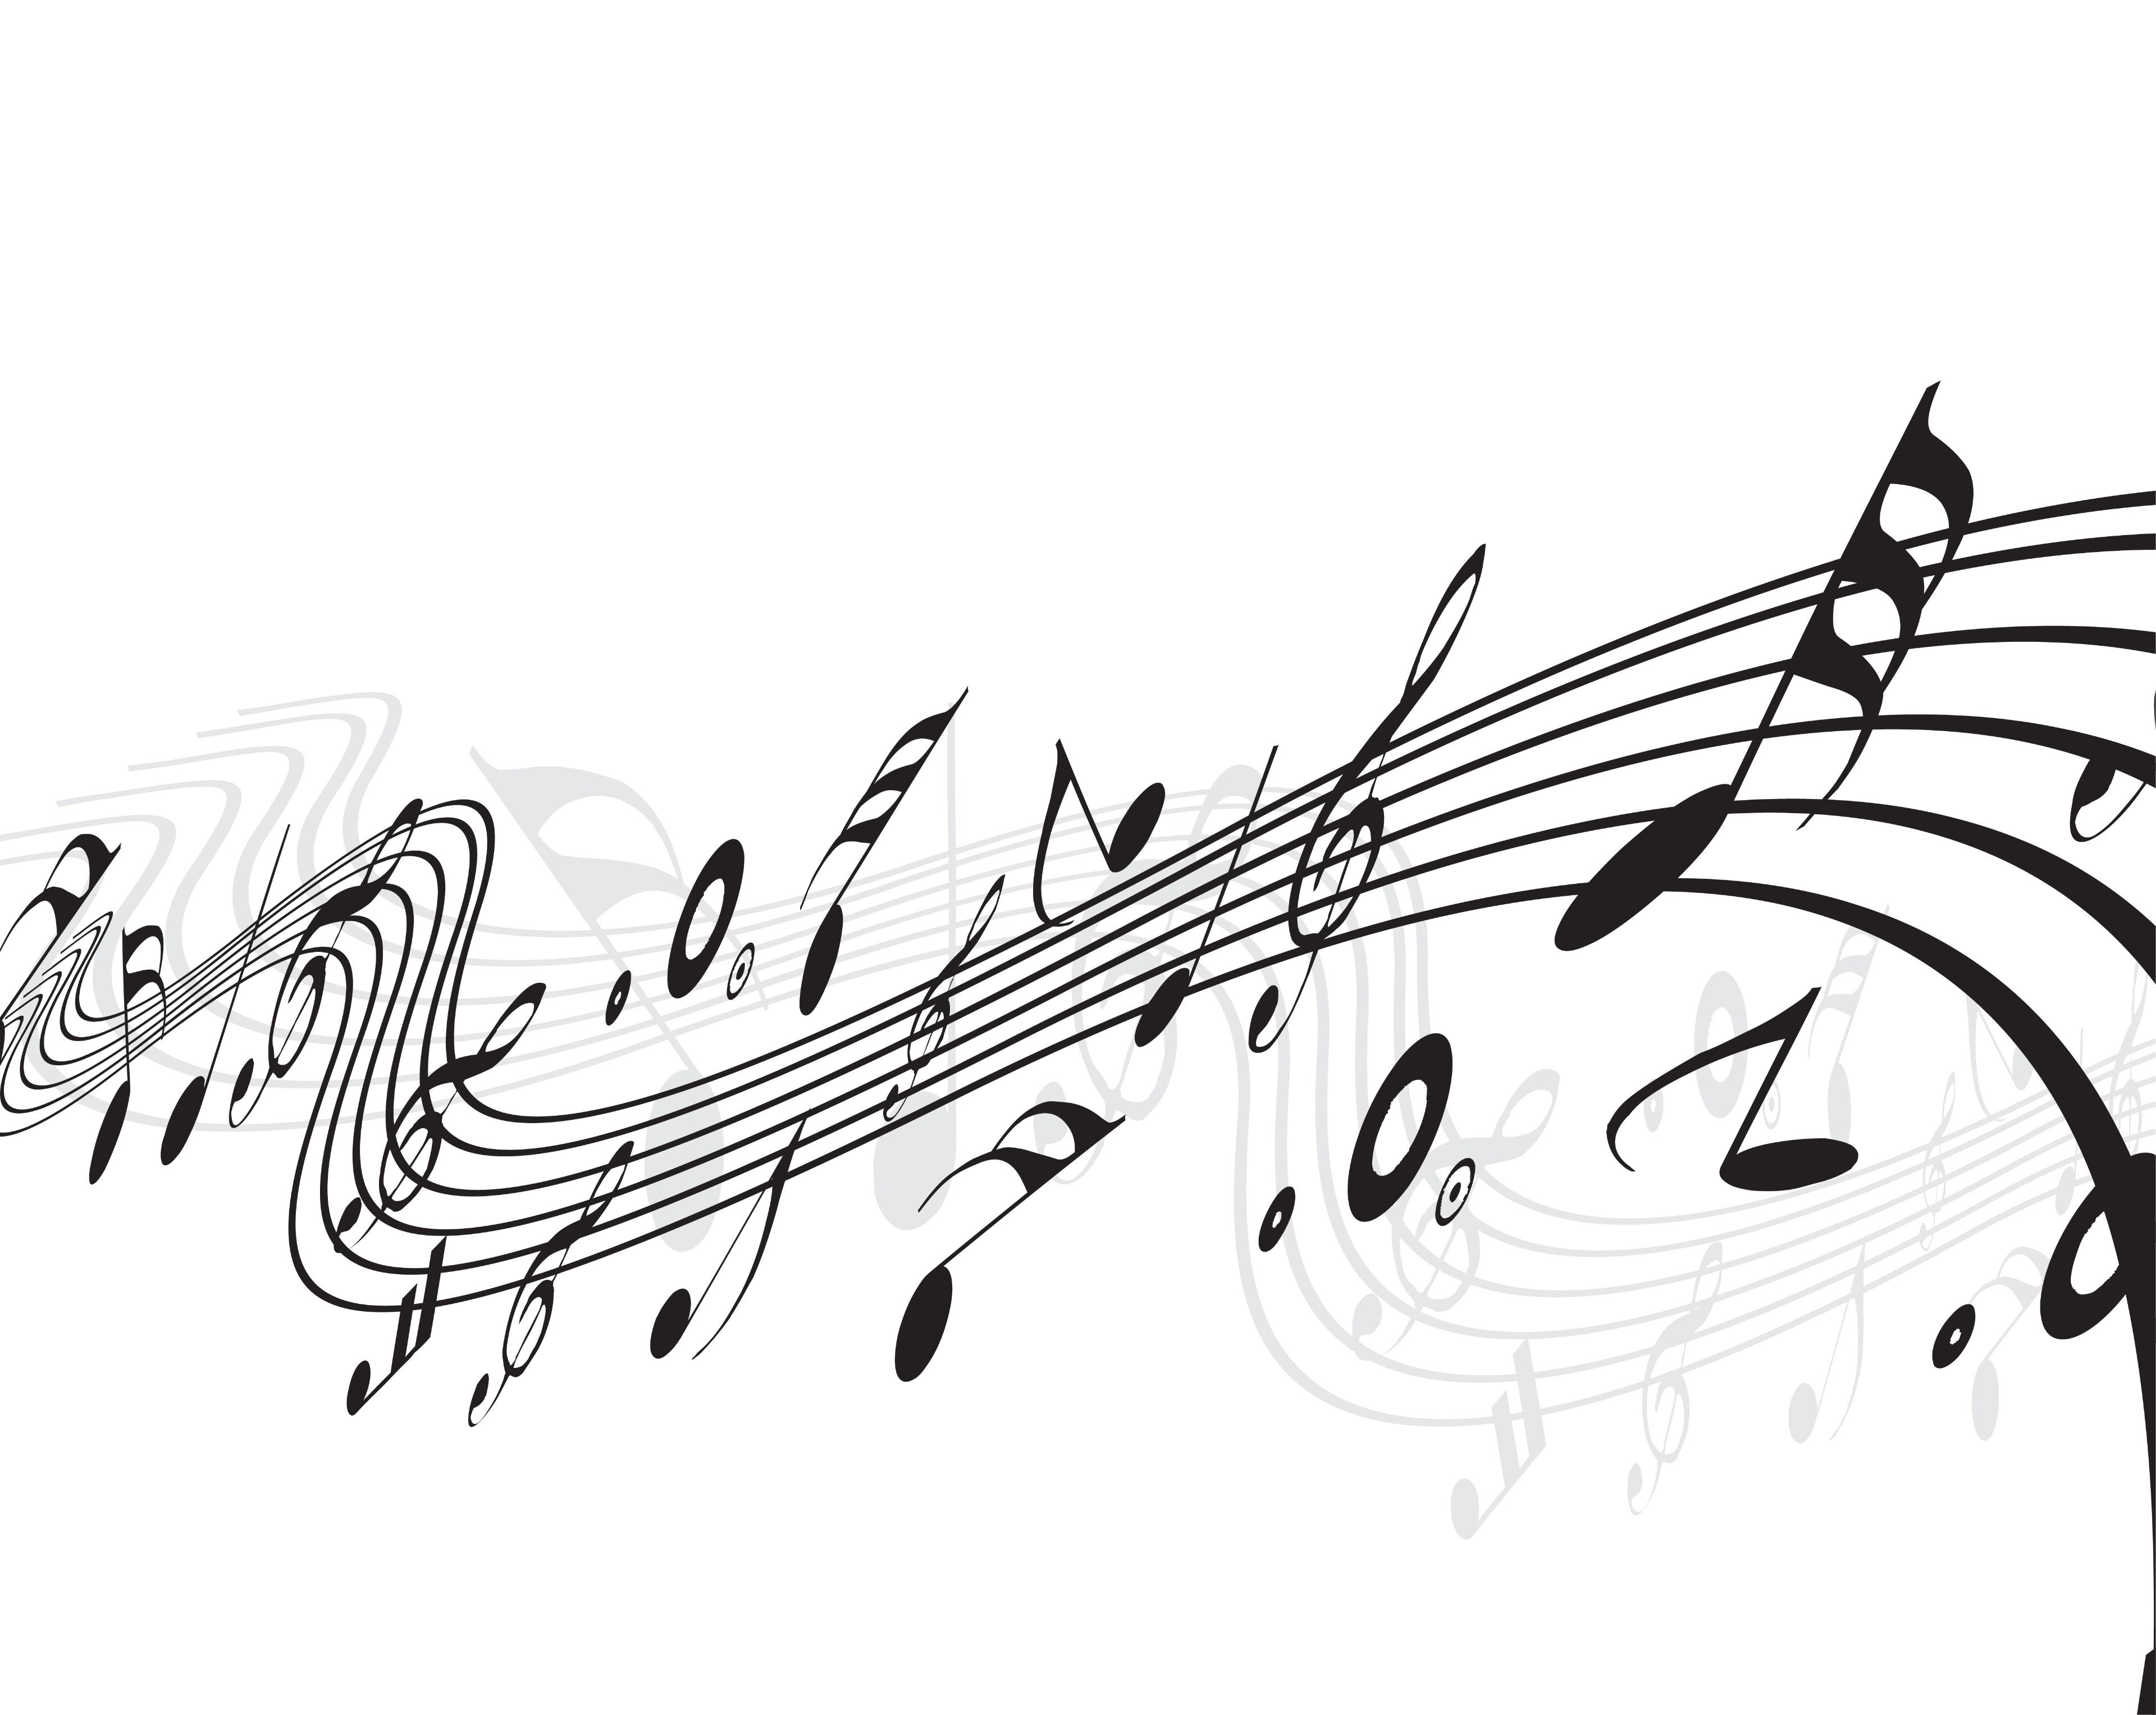 https://ru.freepik.com/free-vector/musical-melody-symbols-yellow-splotch_16853942.htm#fromView=search&page=1&position=38&uuid=1153d3a0-3b85-4638-8462-7fcc95ed26c0